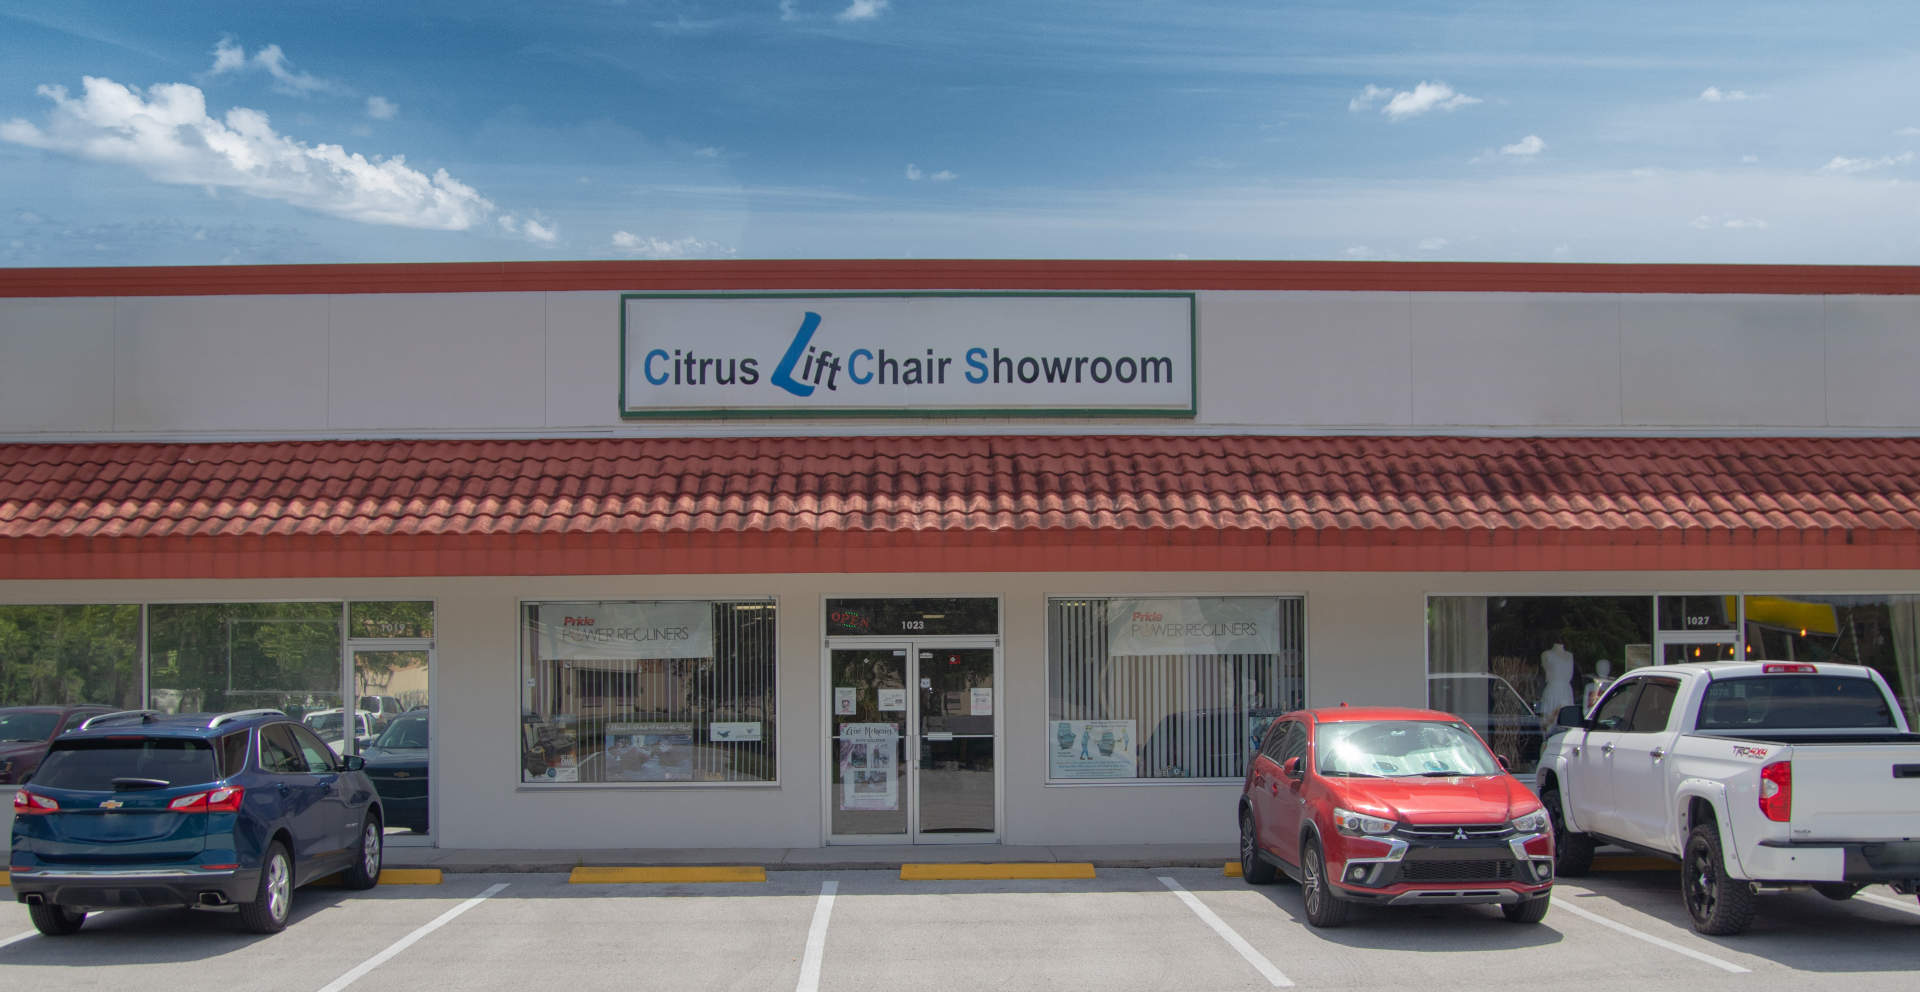 The store front of the Citrus Lift Chair Showroom.